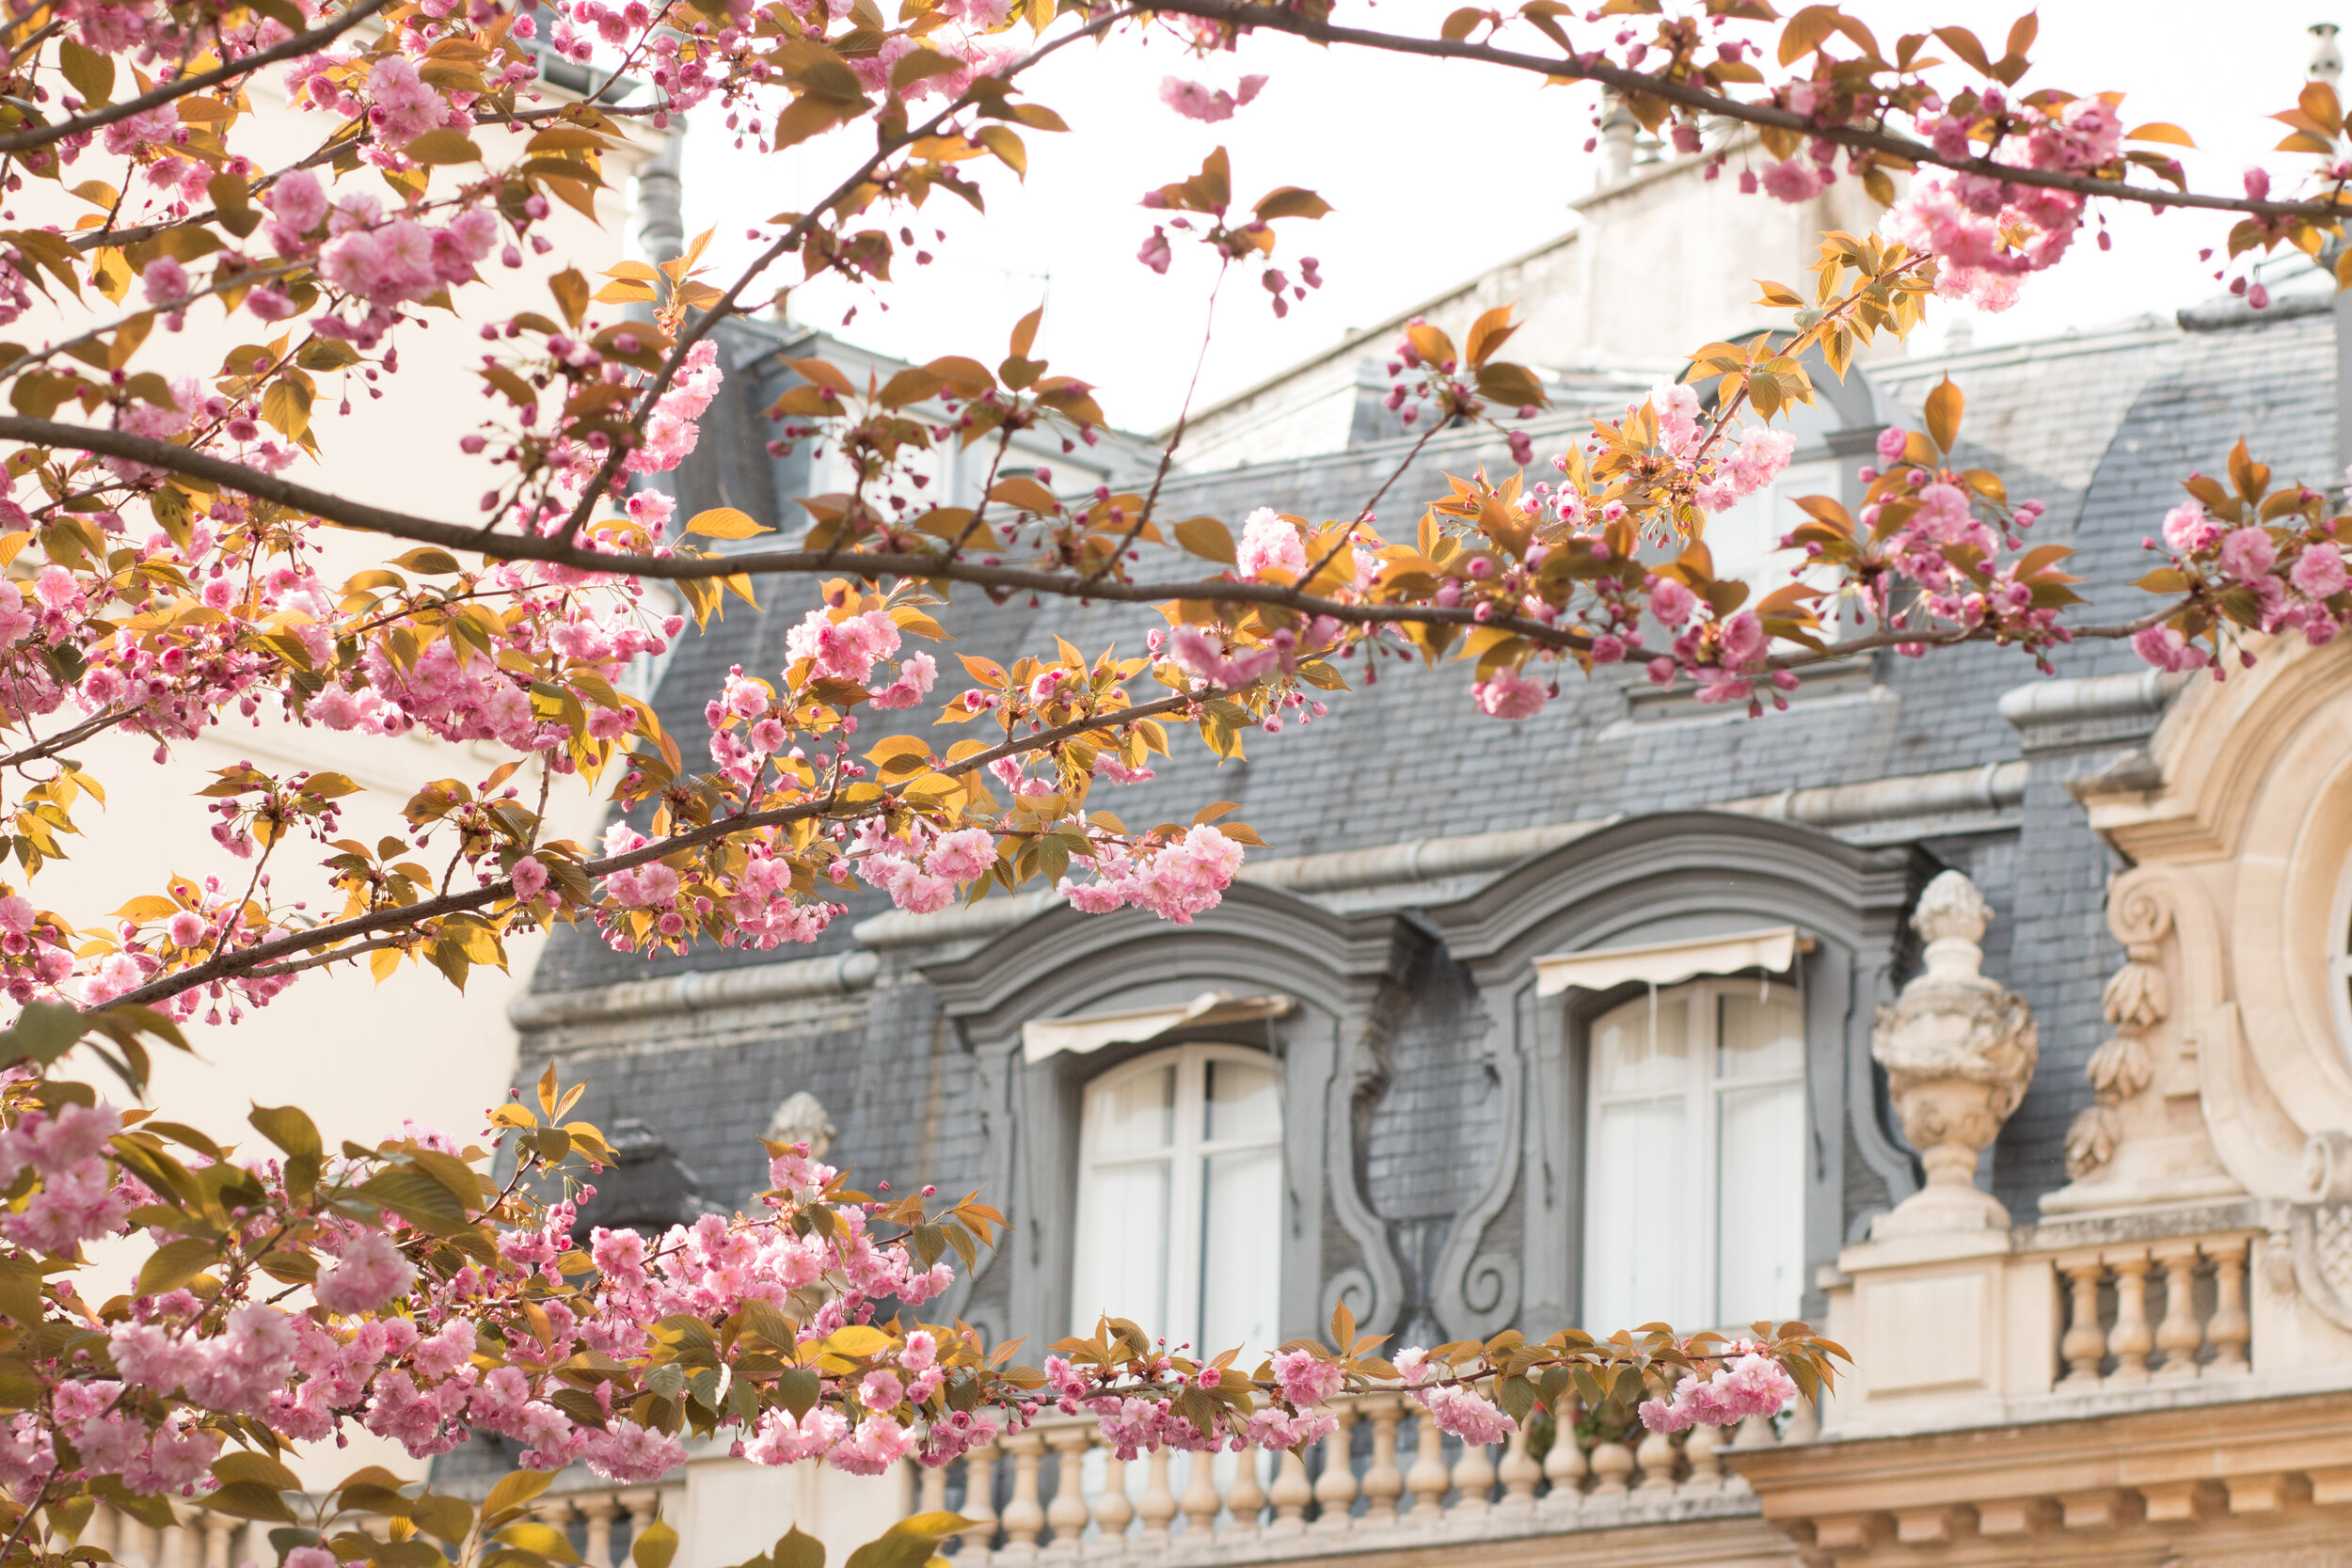 Where to See Paris in Bloom